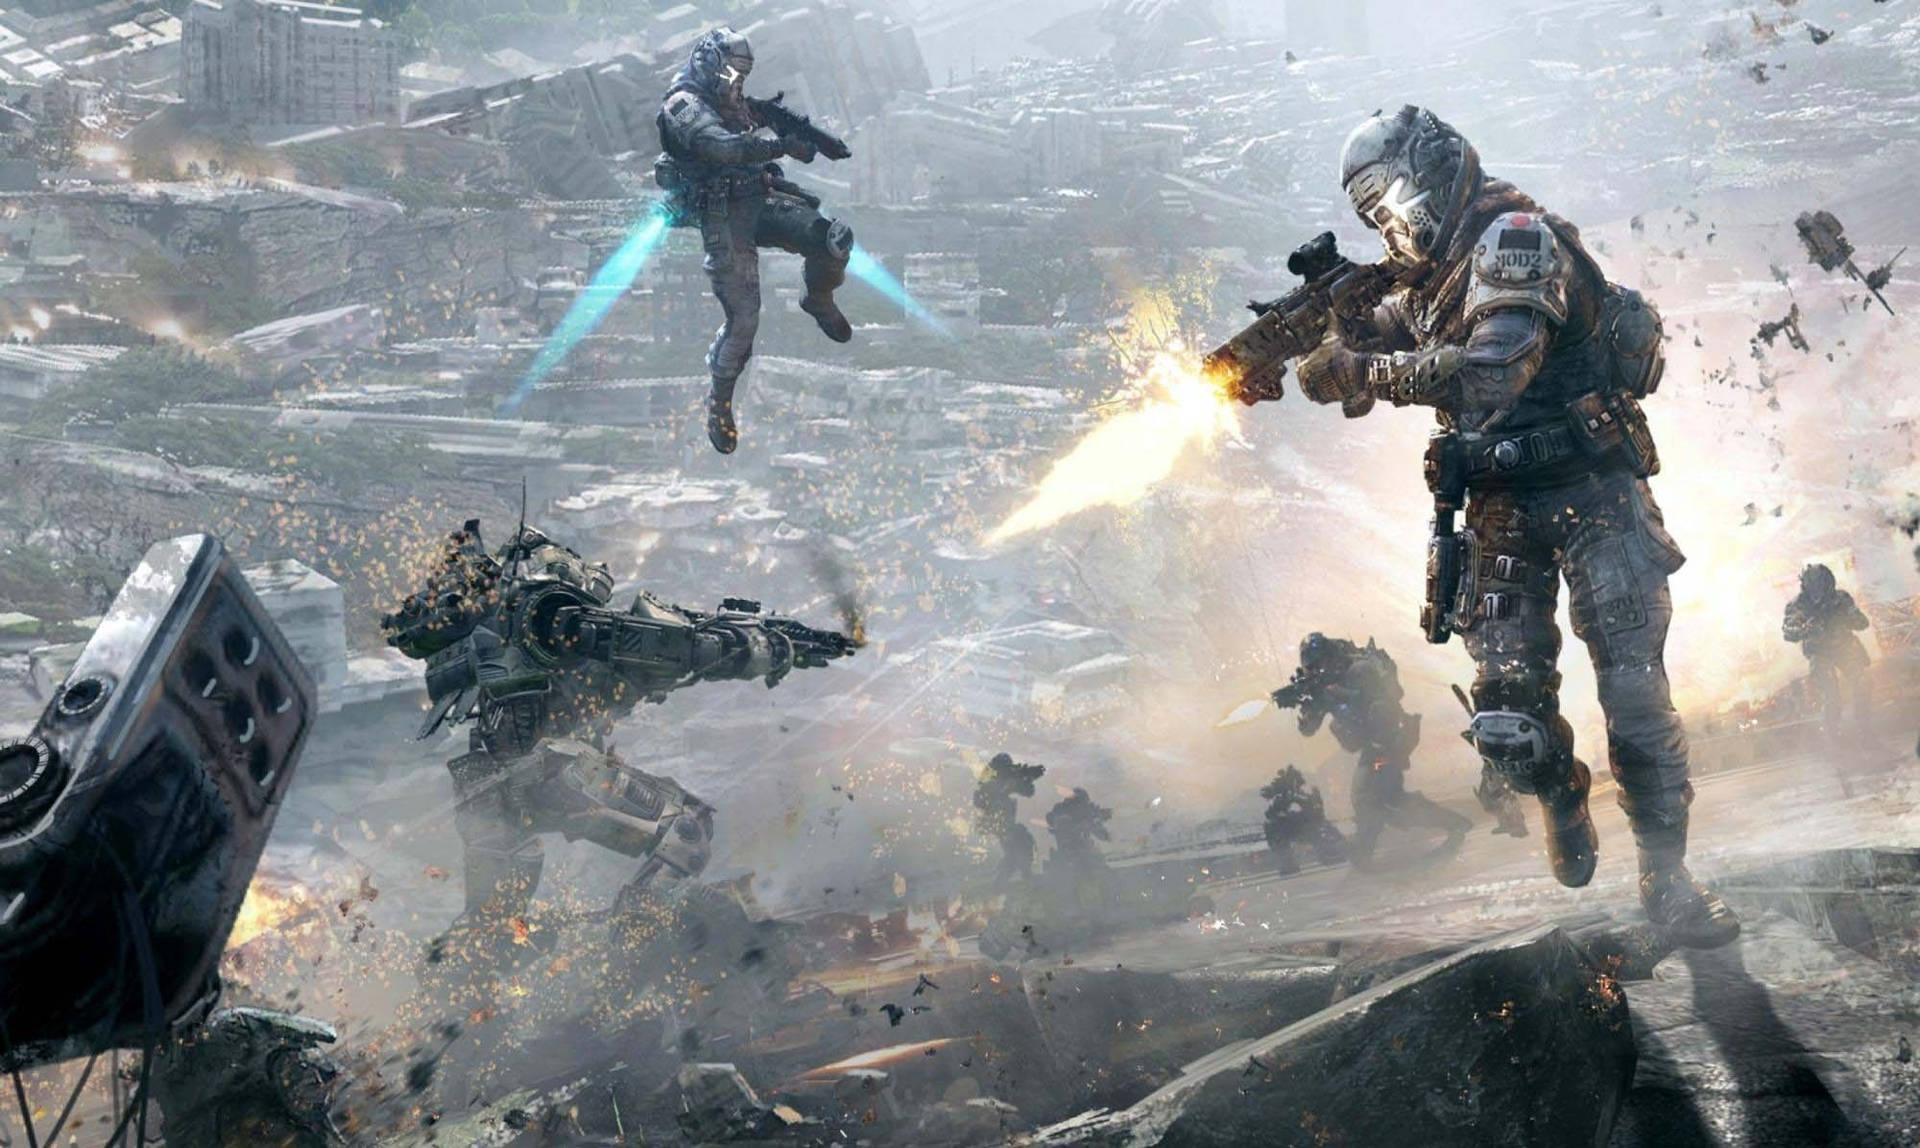 "Two Soldiers Standing Amongst the Destruction of Titanfall 2 Battlefield" Wallpaper